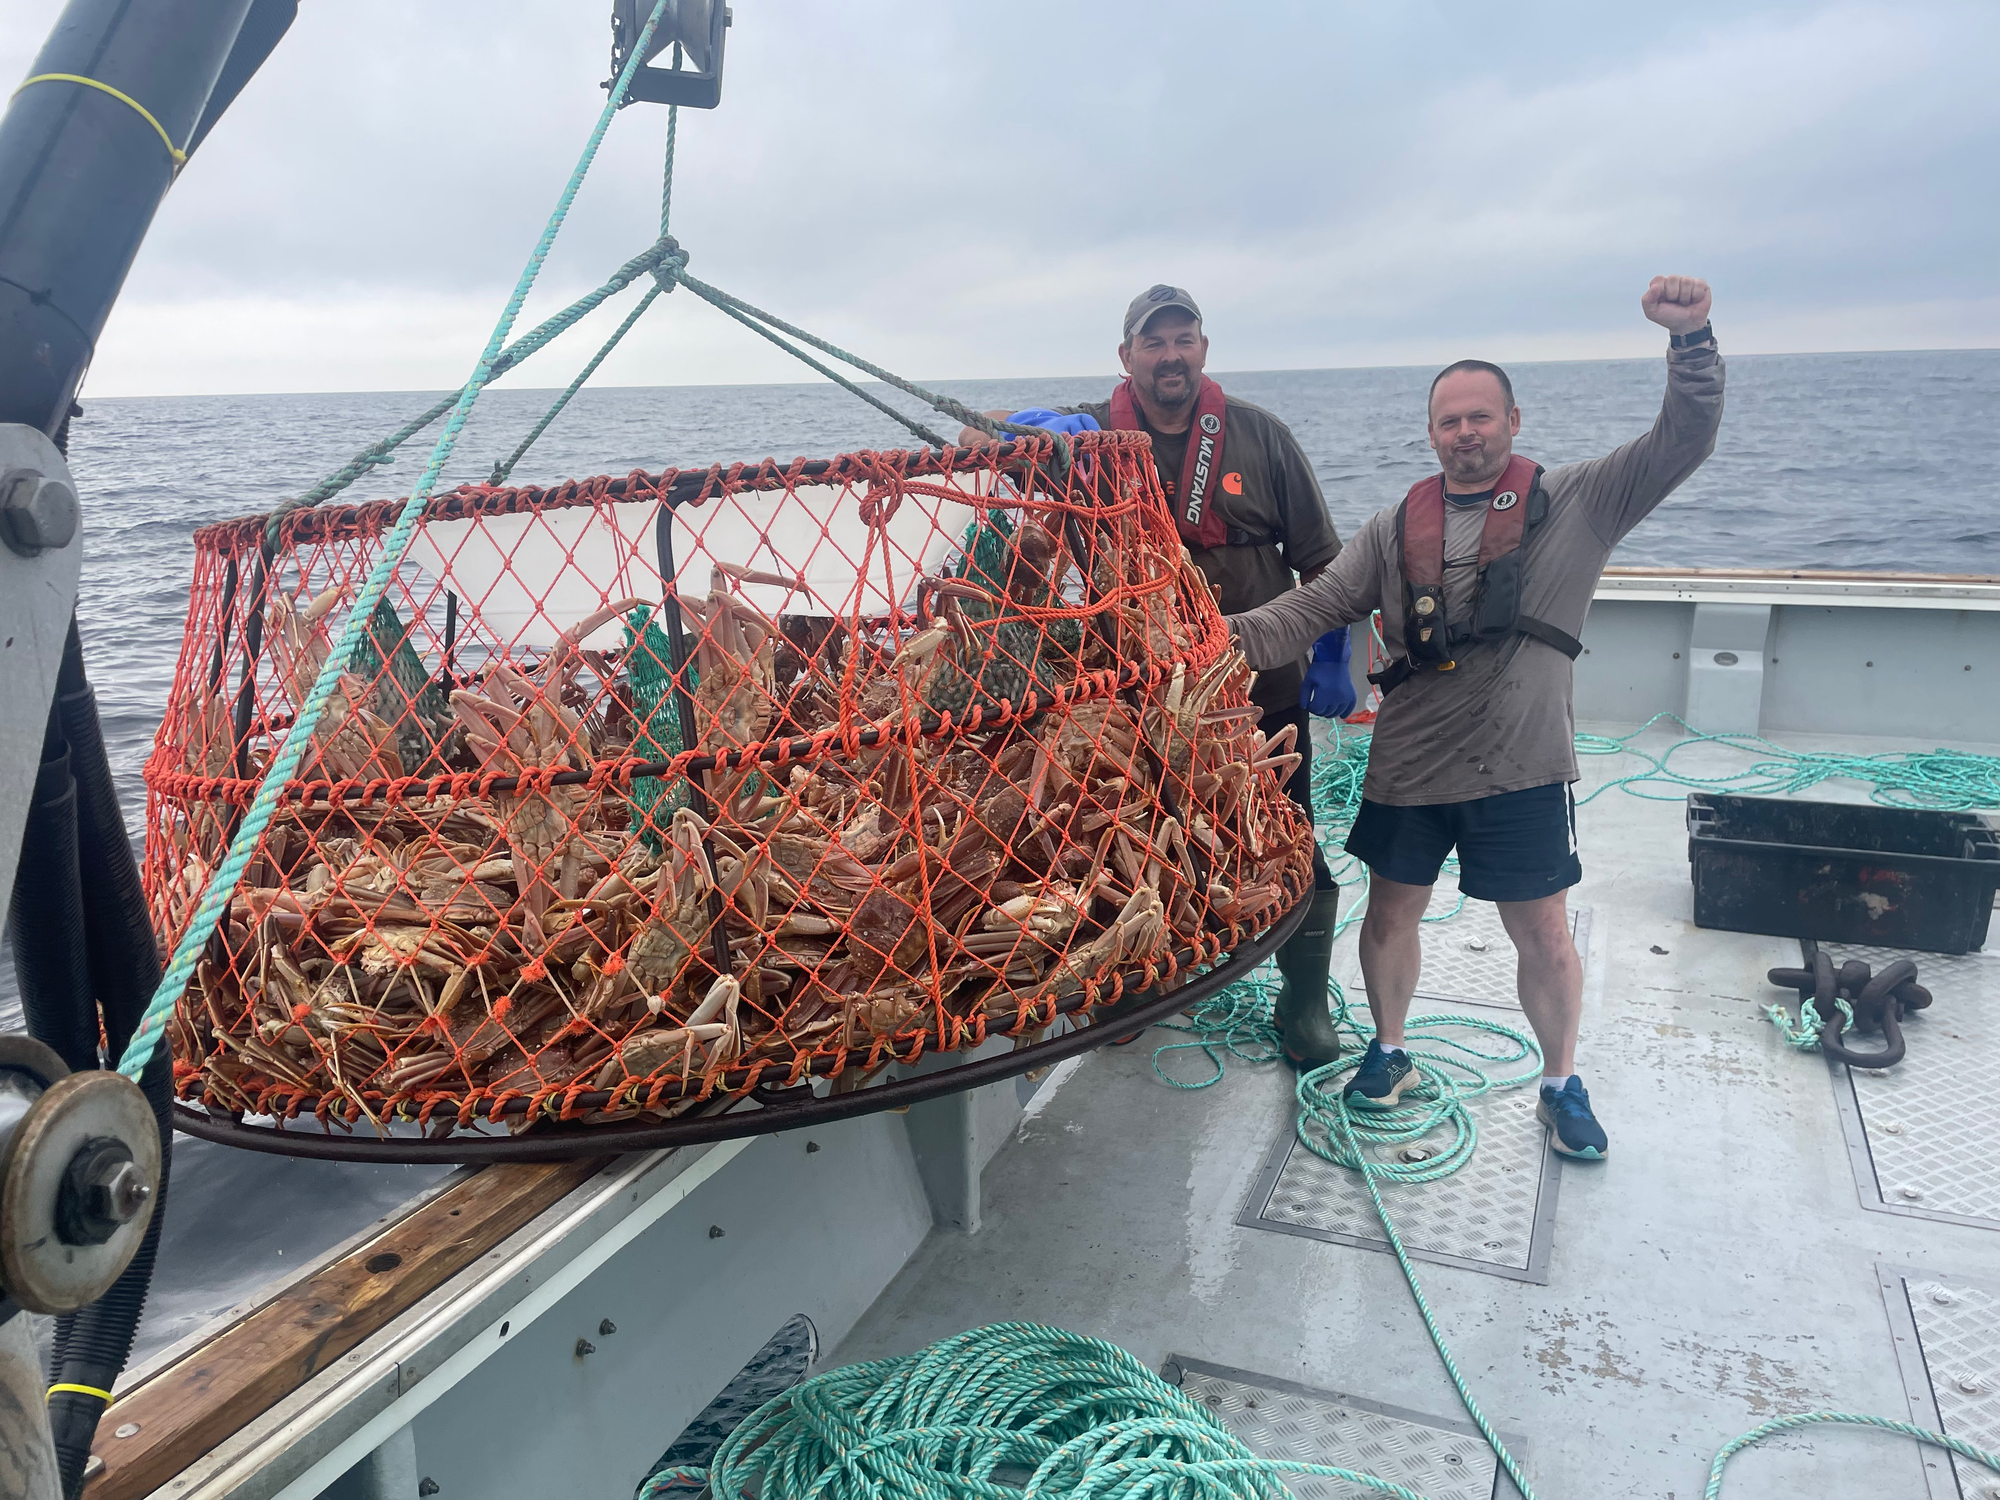 The Story Behind 1,000 lbs of Crab Caught in Zone 19 (Closed due to North Atlantic Right Whale Sighting)